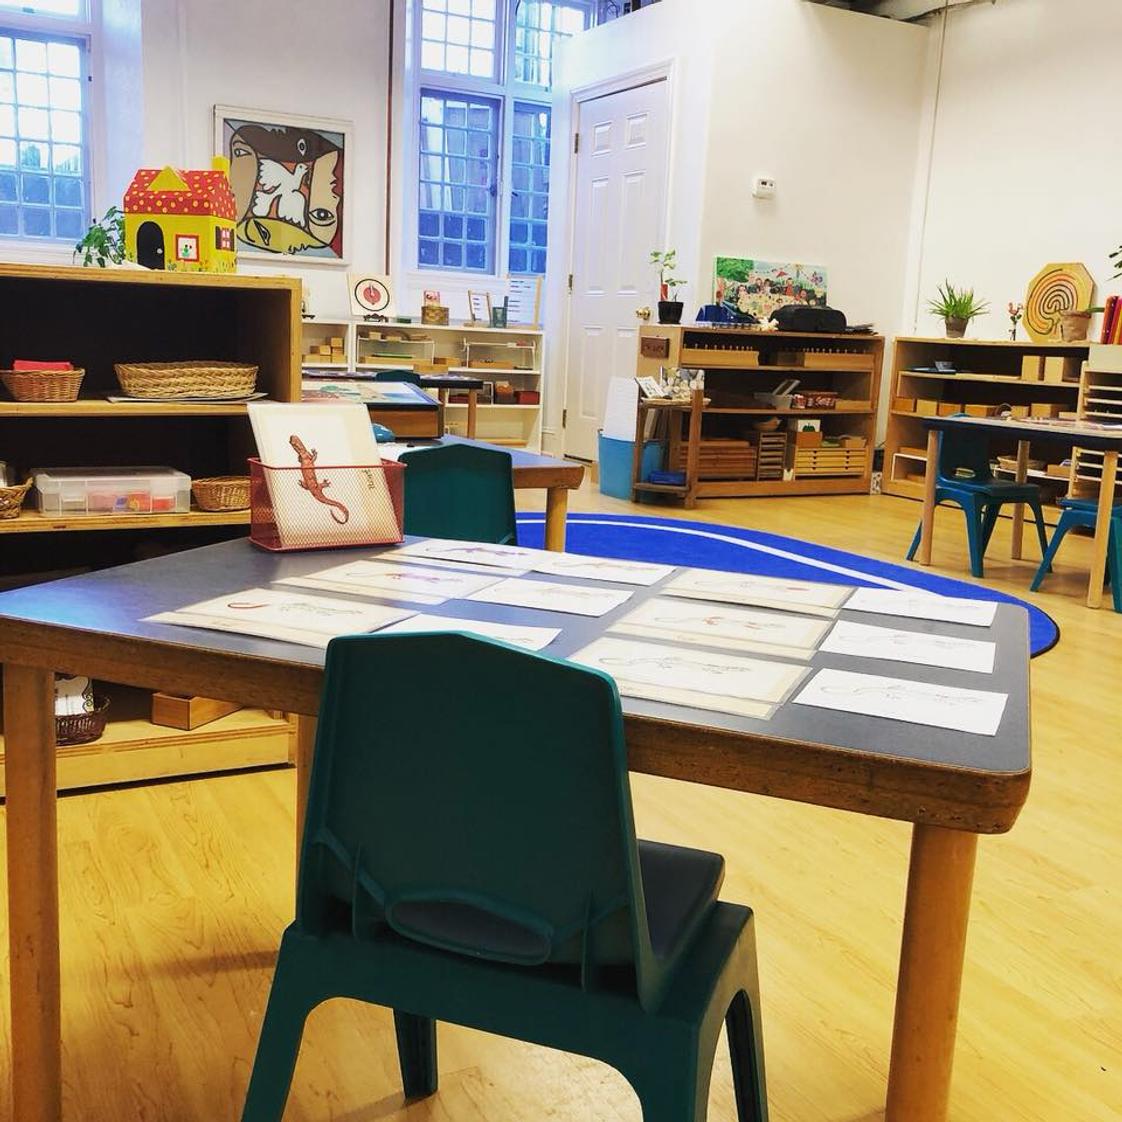 Montessori School Of Chevy Chase Photo - Our classrooms at The Montessori School of Chevy Chase provide a beautiful, warm, challenging, and stimulating environment.